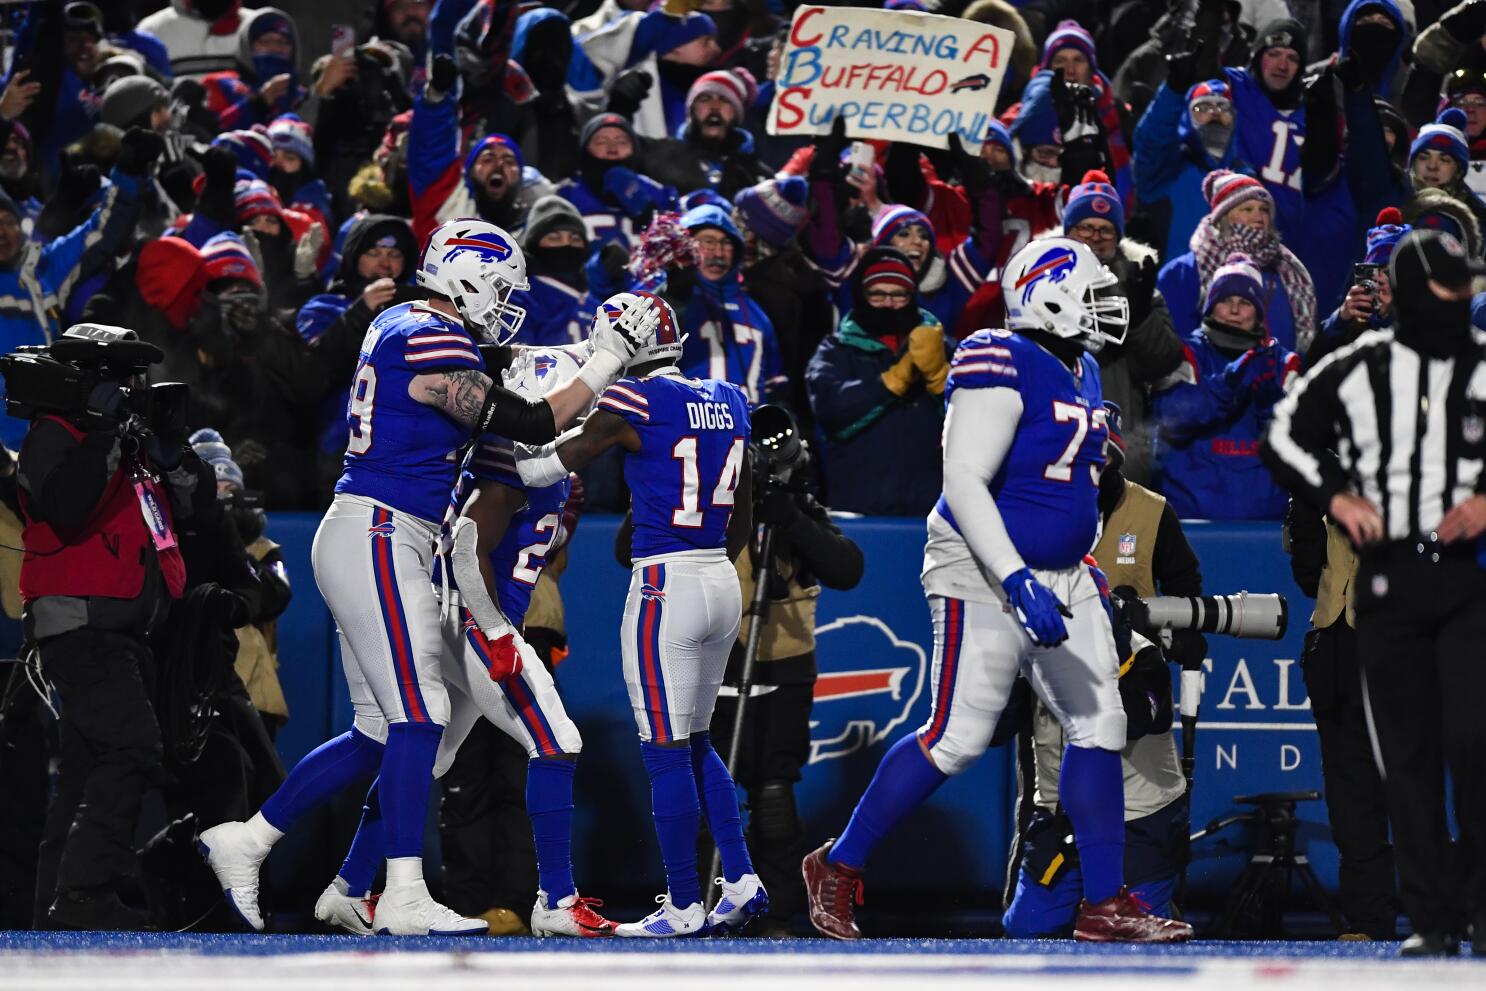 All our coverage: Bills vs Chiefs rematch in AFC Divisional round